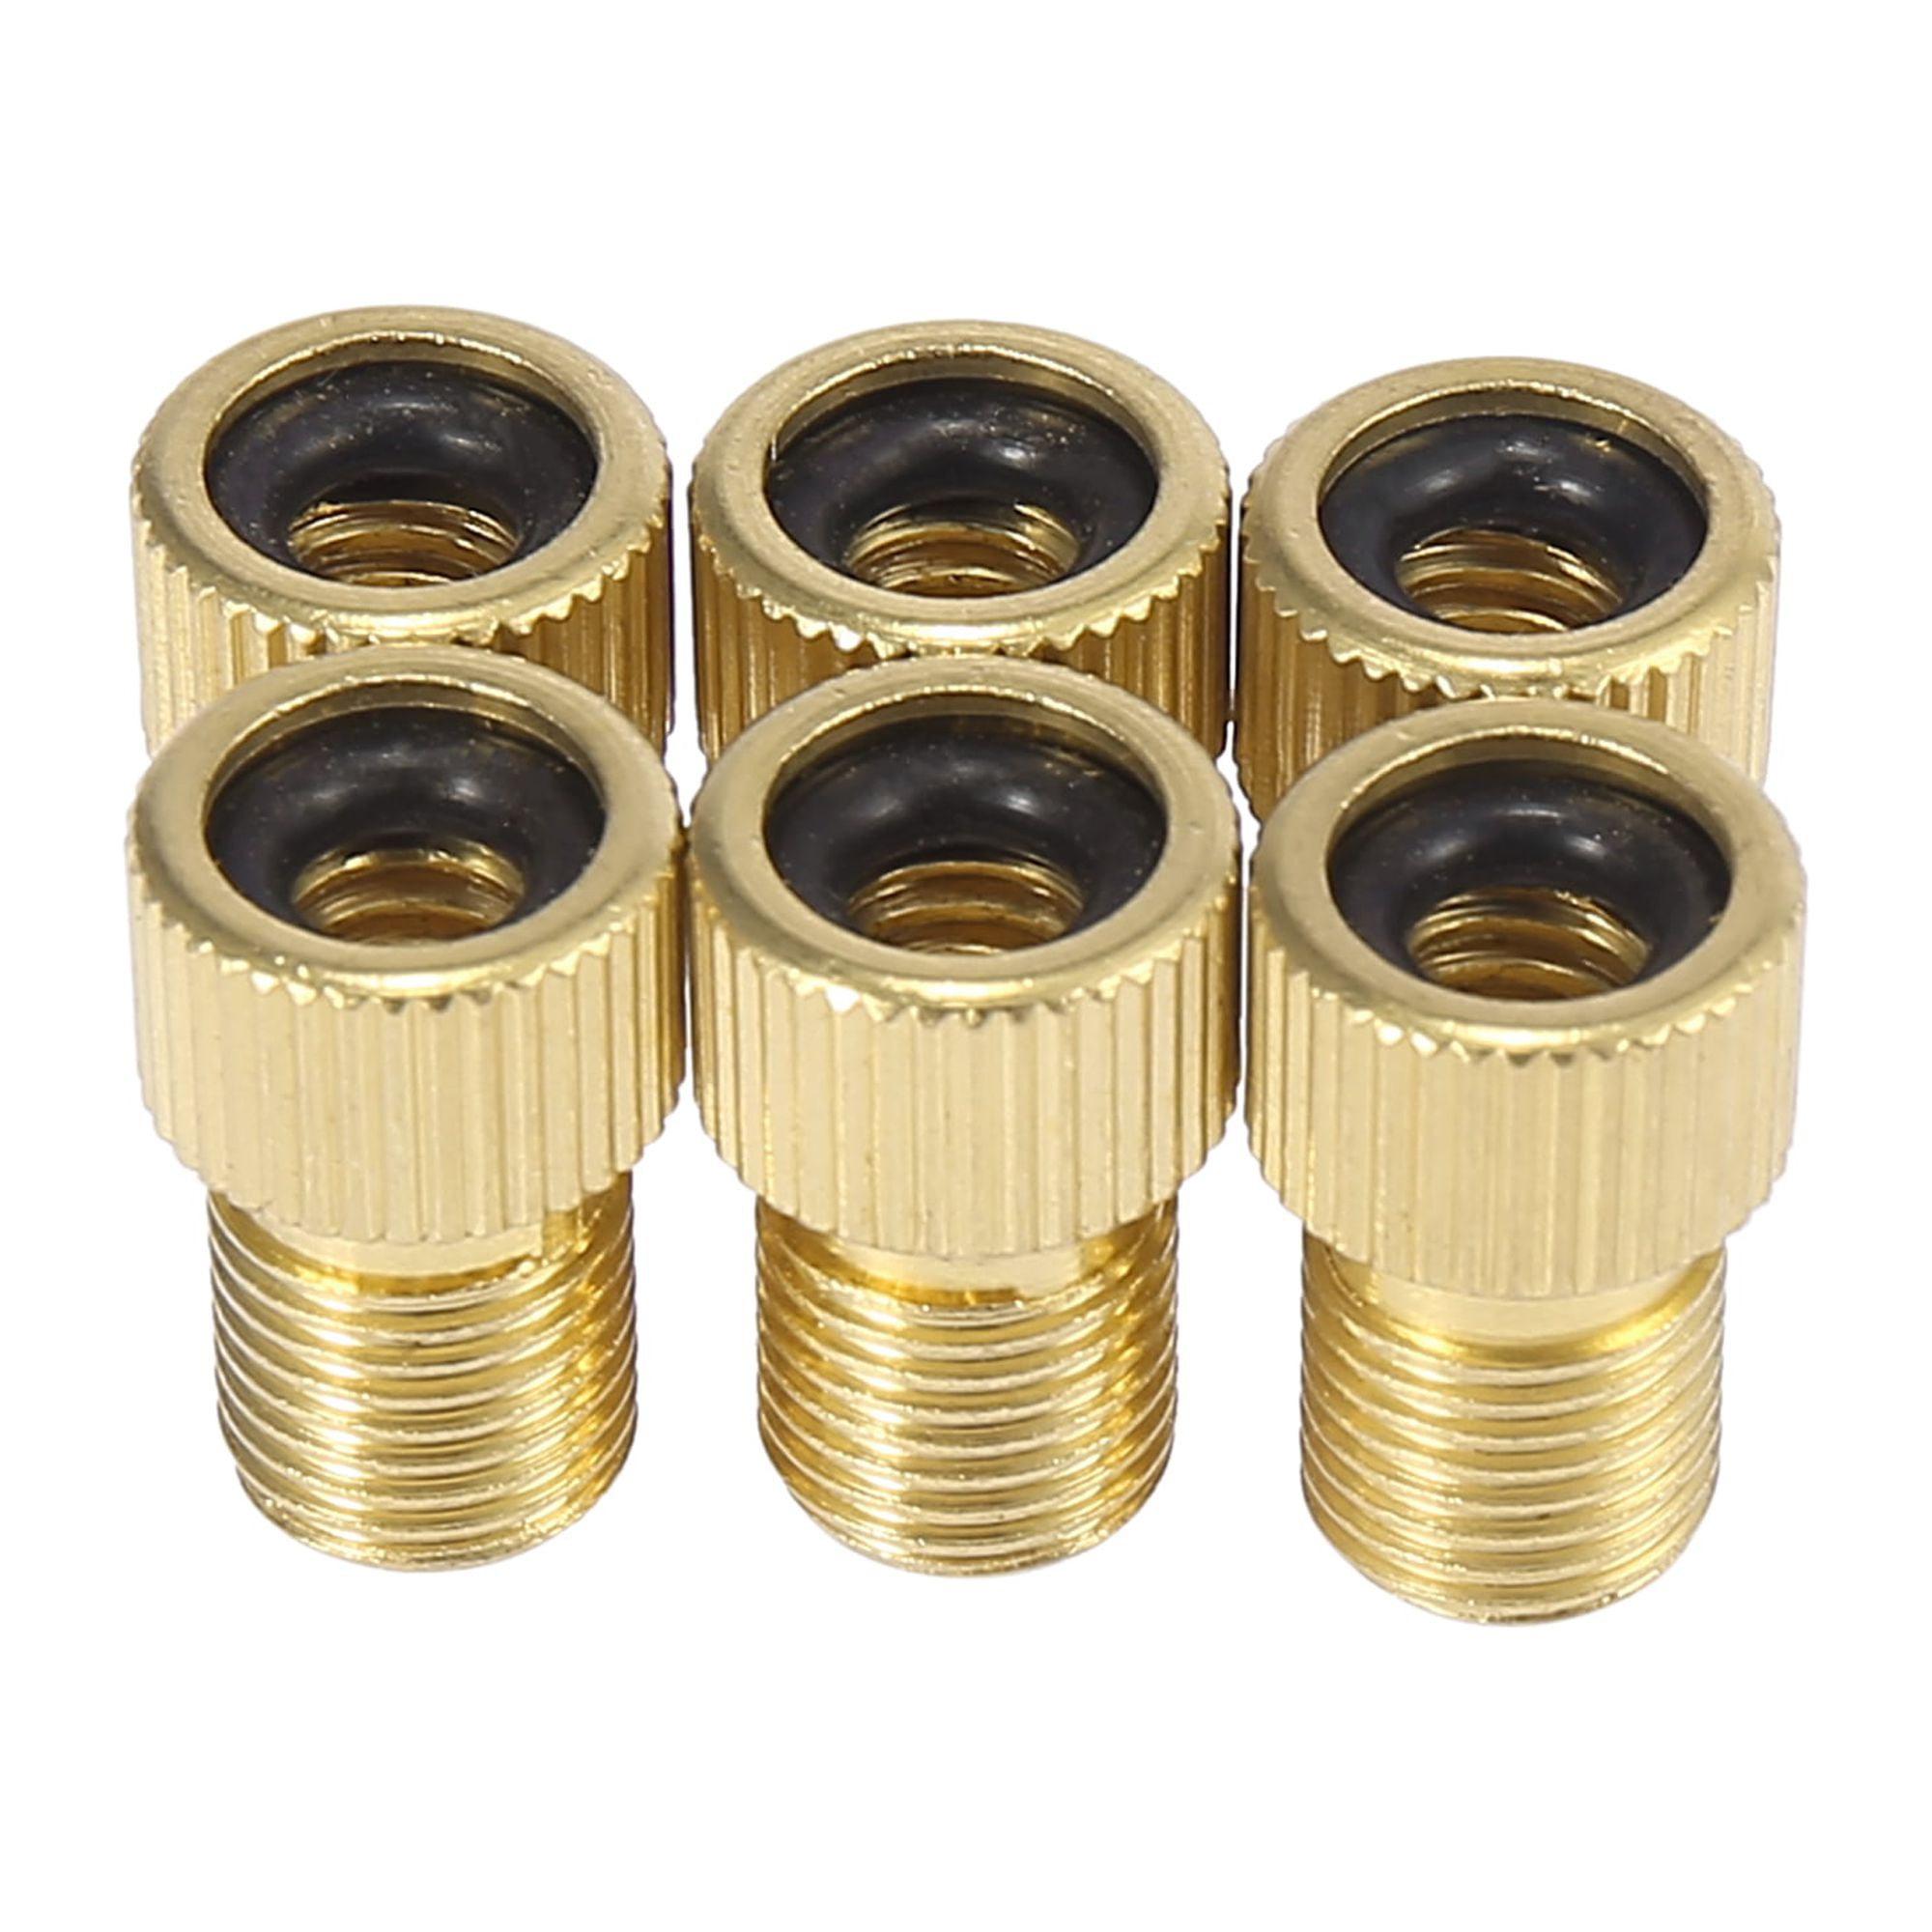 Bike Front Fork Valve Adapter Aluminum Alloy Bicycle Air Fork Inflatable  Valve Adaptor for Standard Pump or Air Compressor